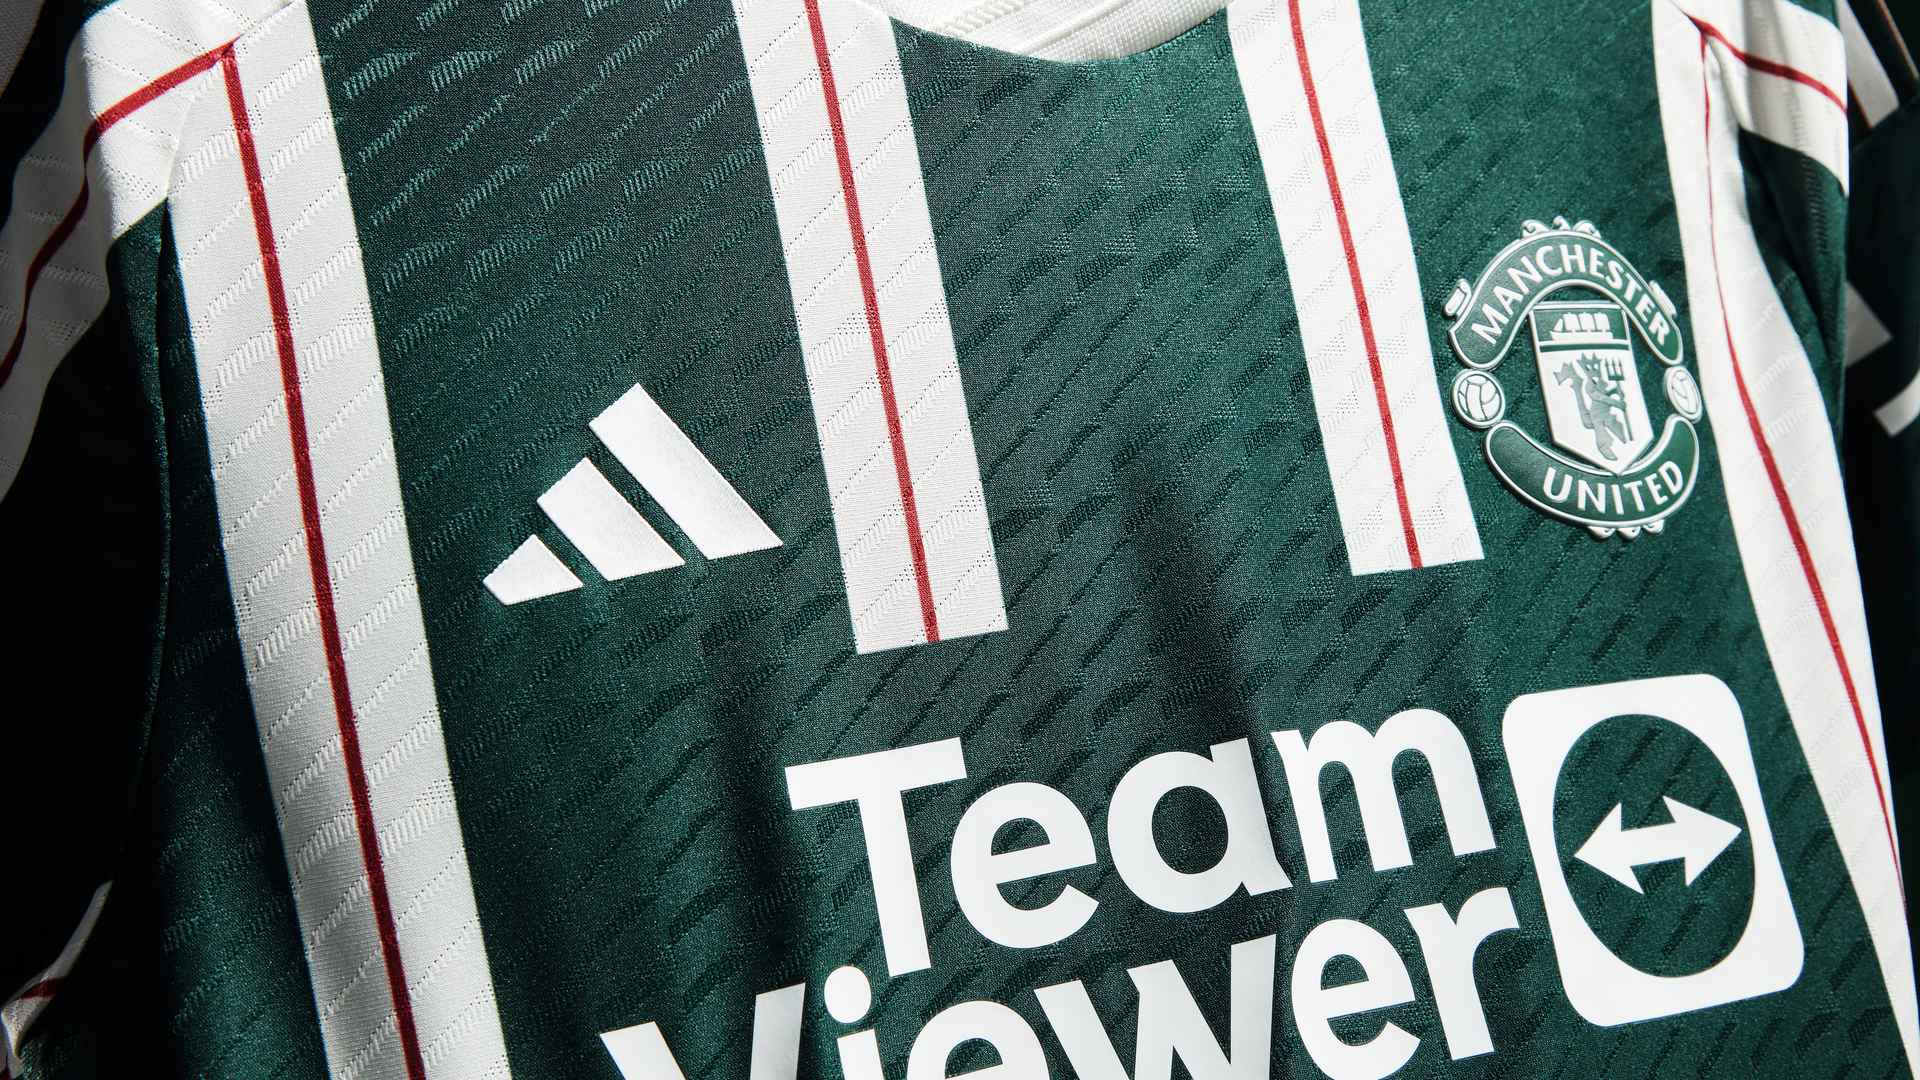 Five things we noticed about the Man Utd adidas 2023/24 away kit ...